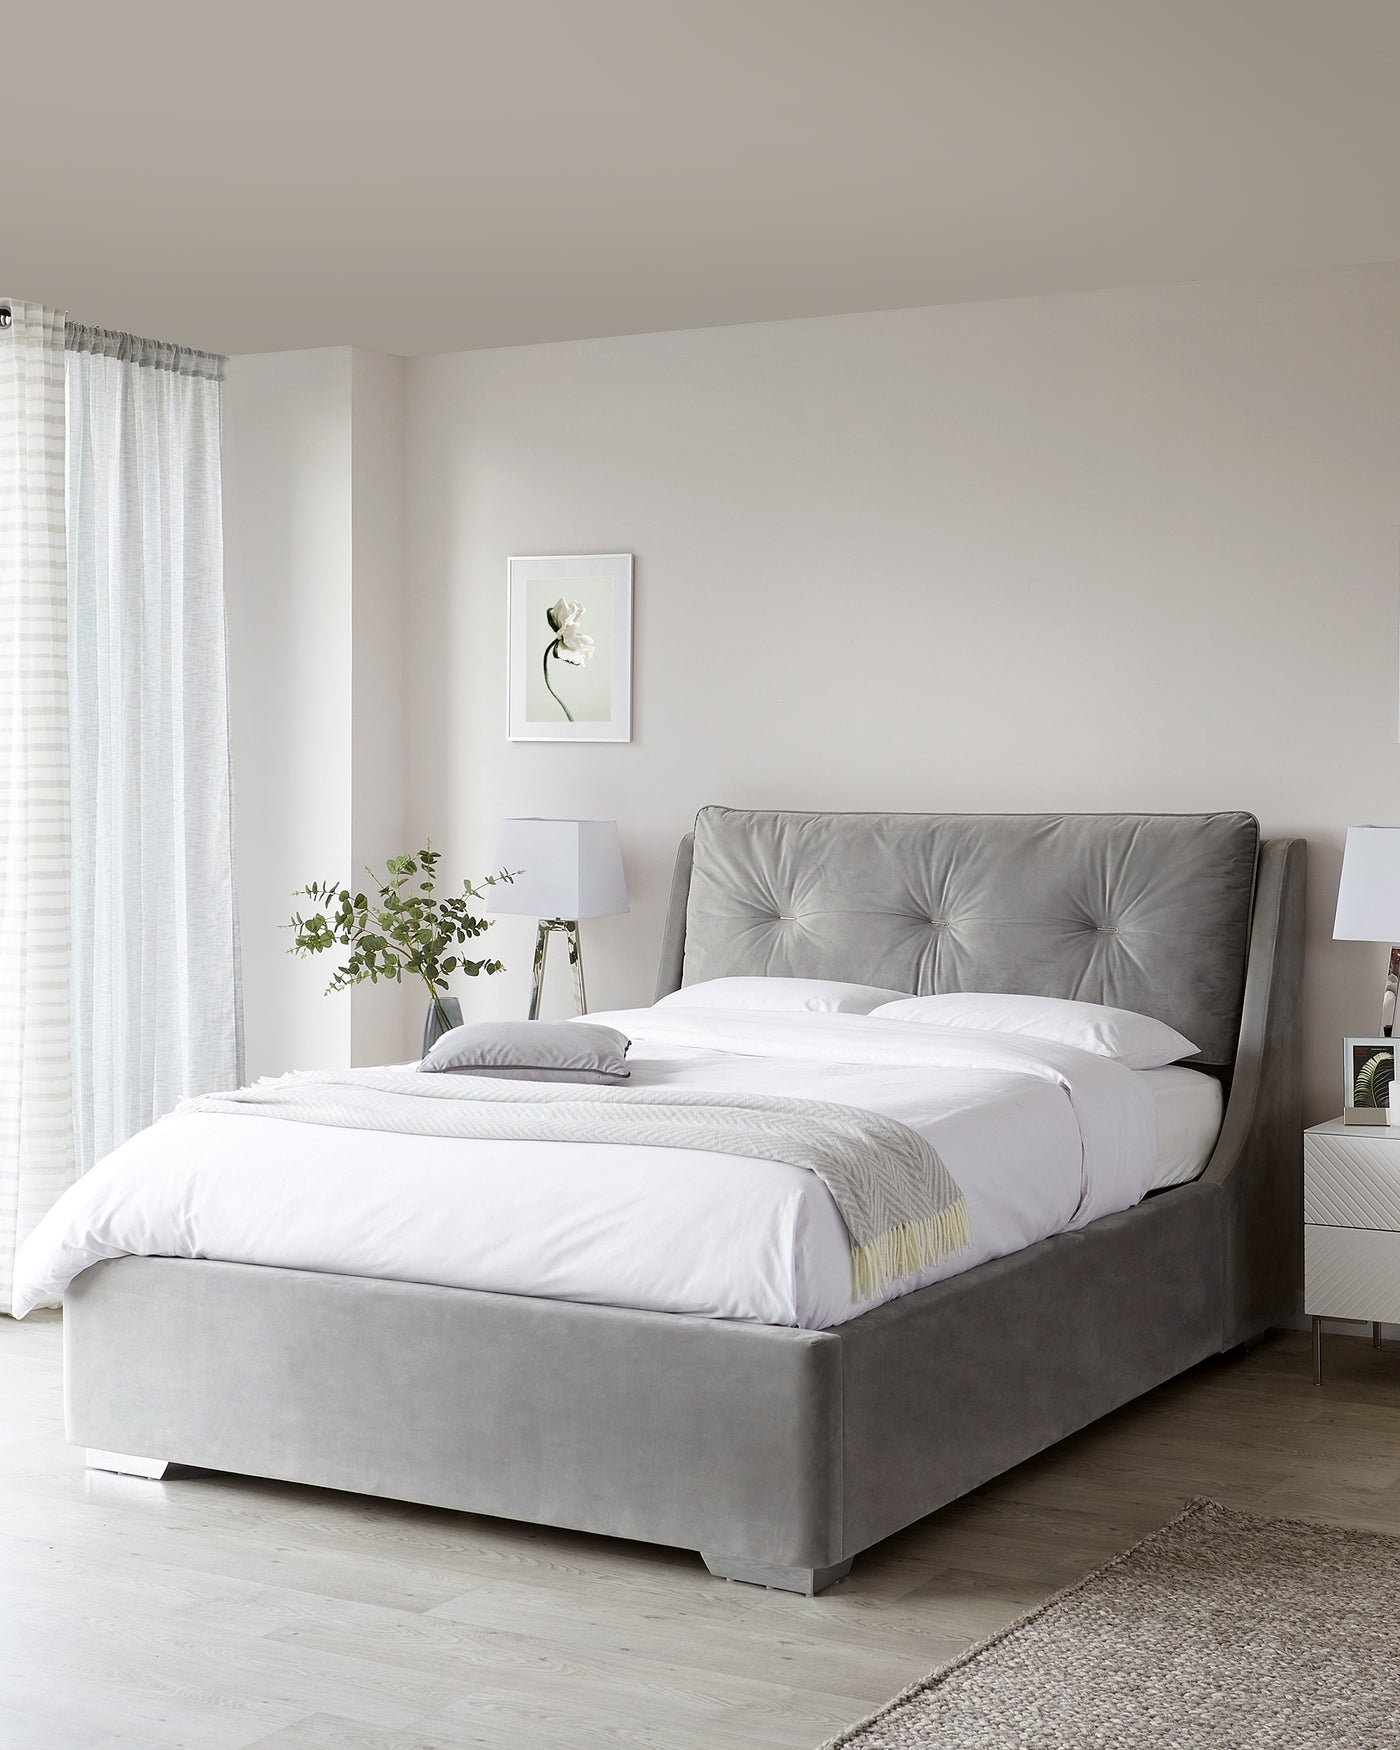 Elegant grey upholstered bed with tufted headboard, complemented by crisp white bed linen and a soft grey throw blanket. The bed features clean lines and a contemporary design, suitable for a modern bedroom setting.